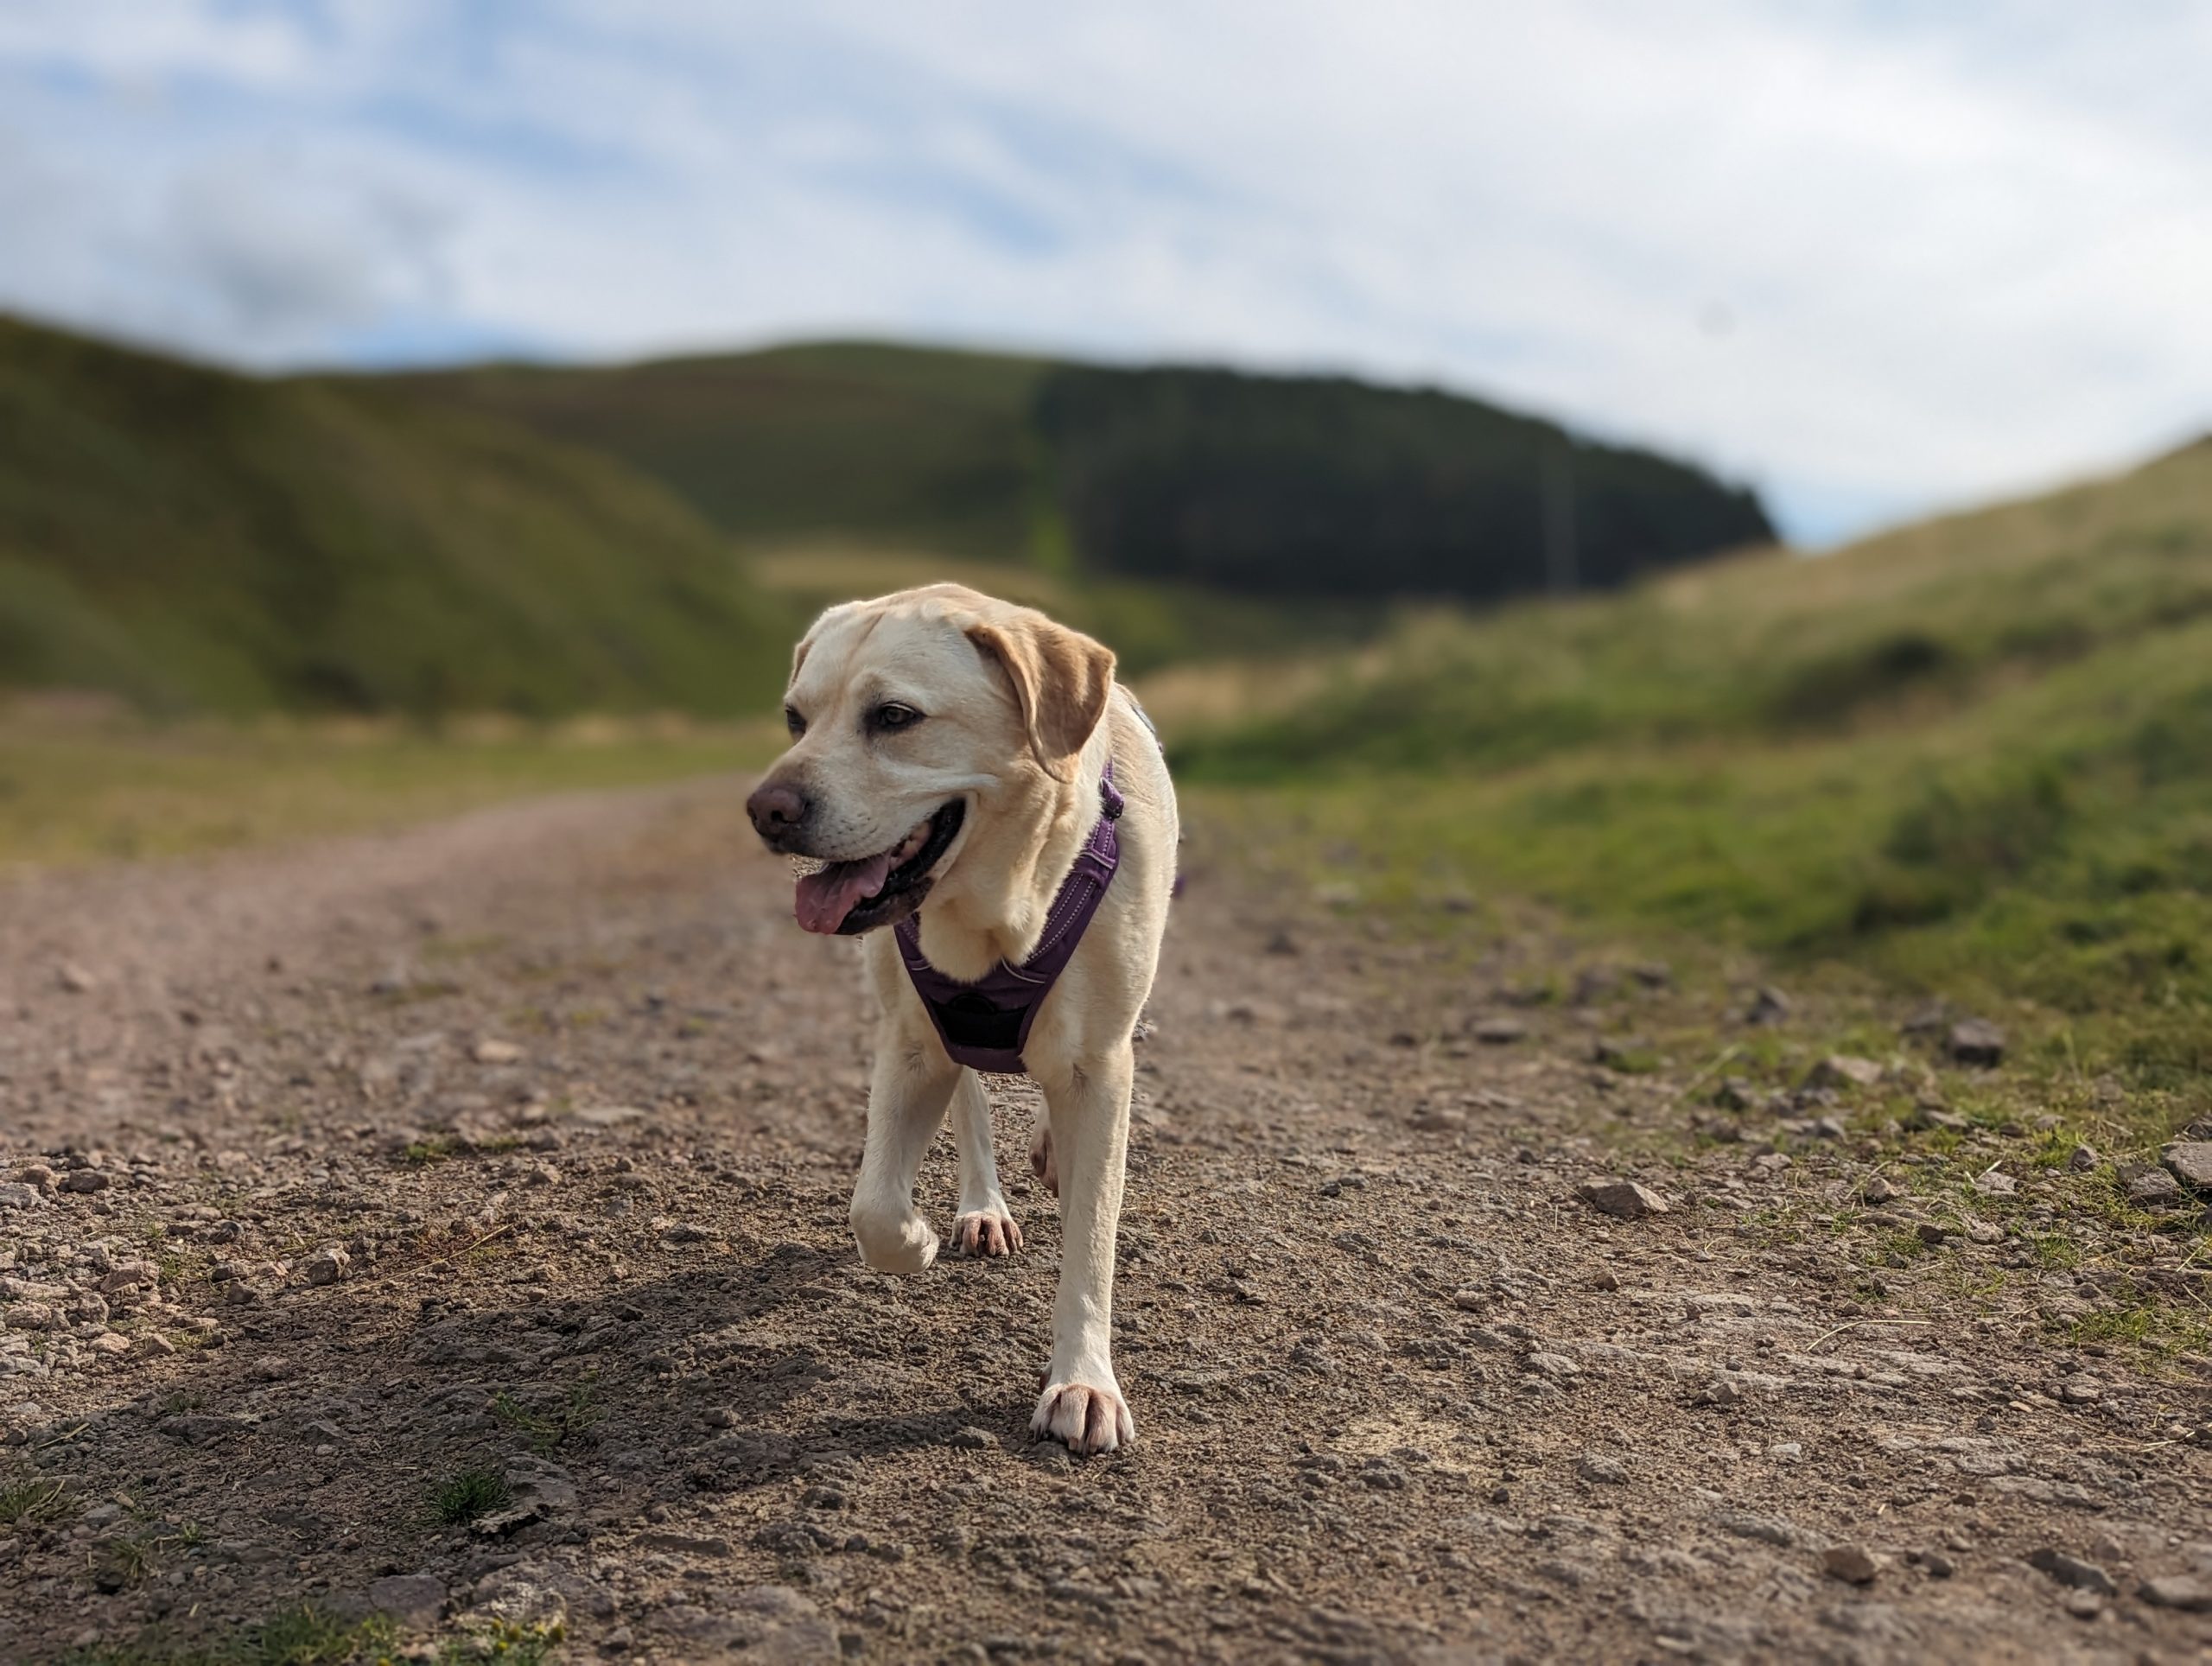 Labrador dog casually walking down farm track with hills in background